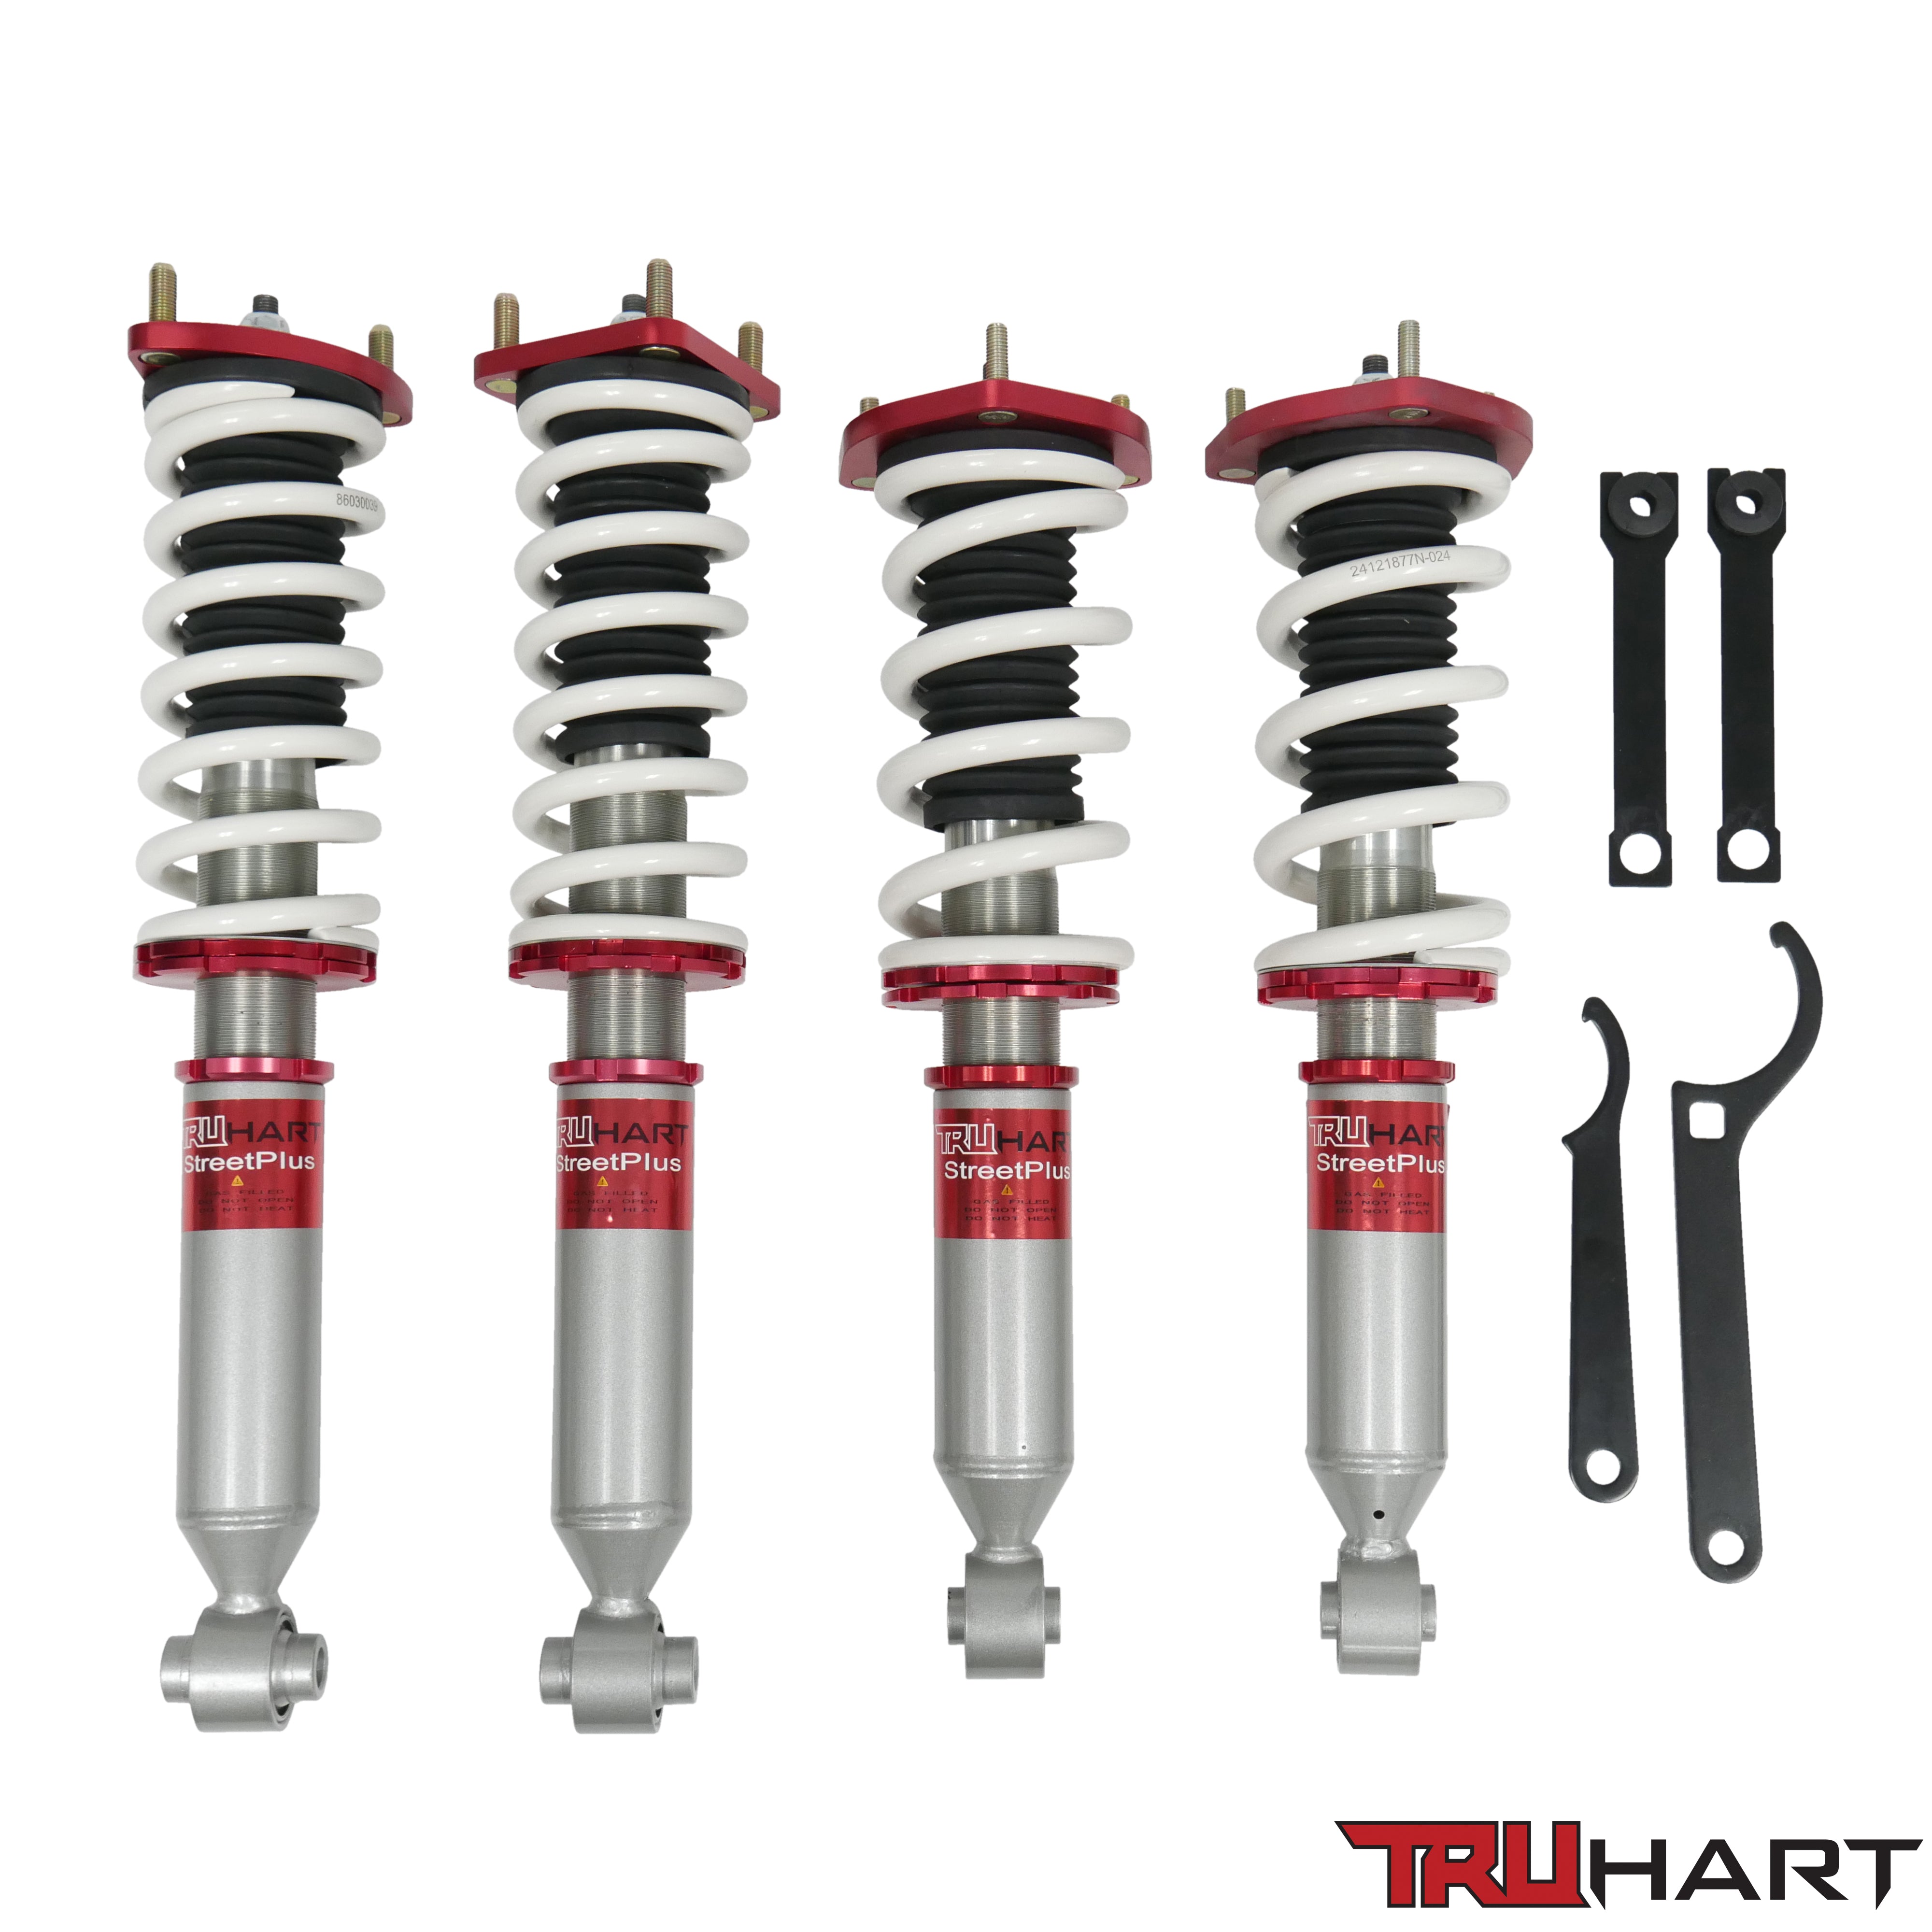 TruHart, Truhart Lexus IS300: 01-05 StreetPlus Coilovers | TH-L802